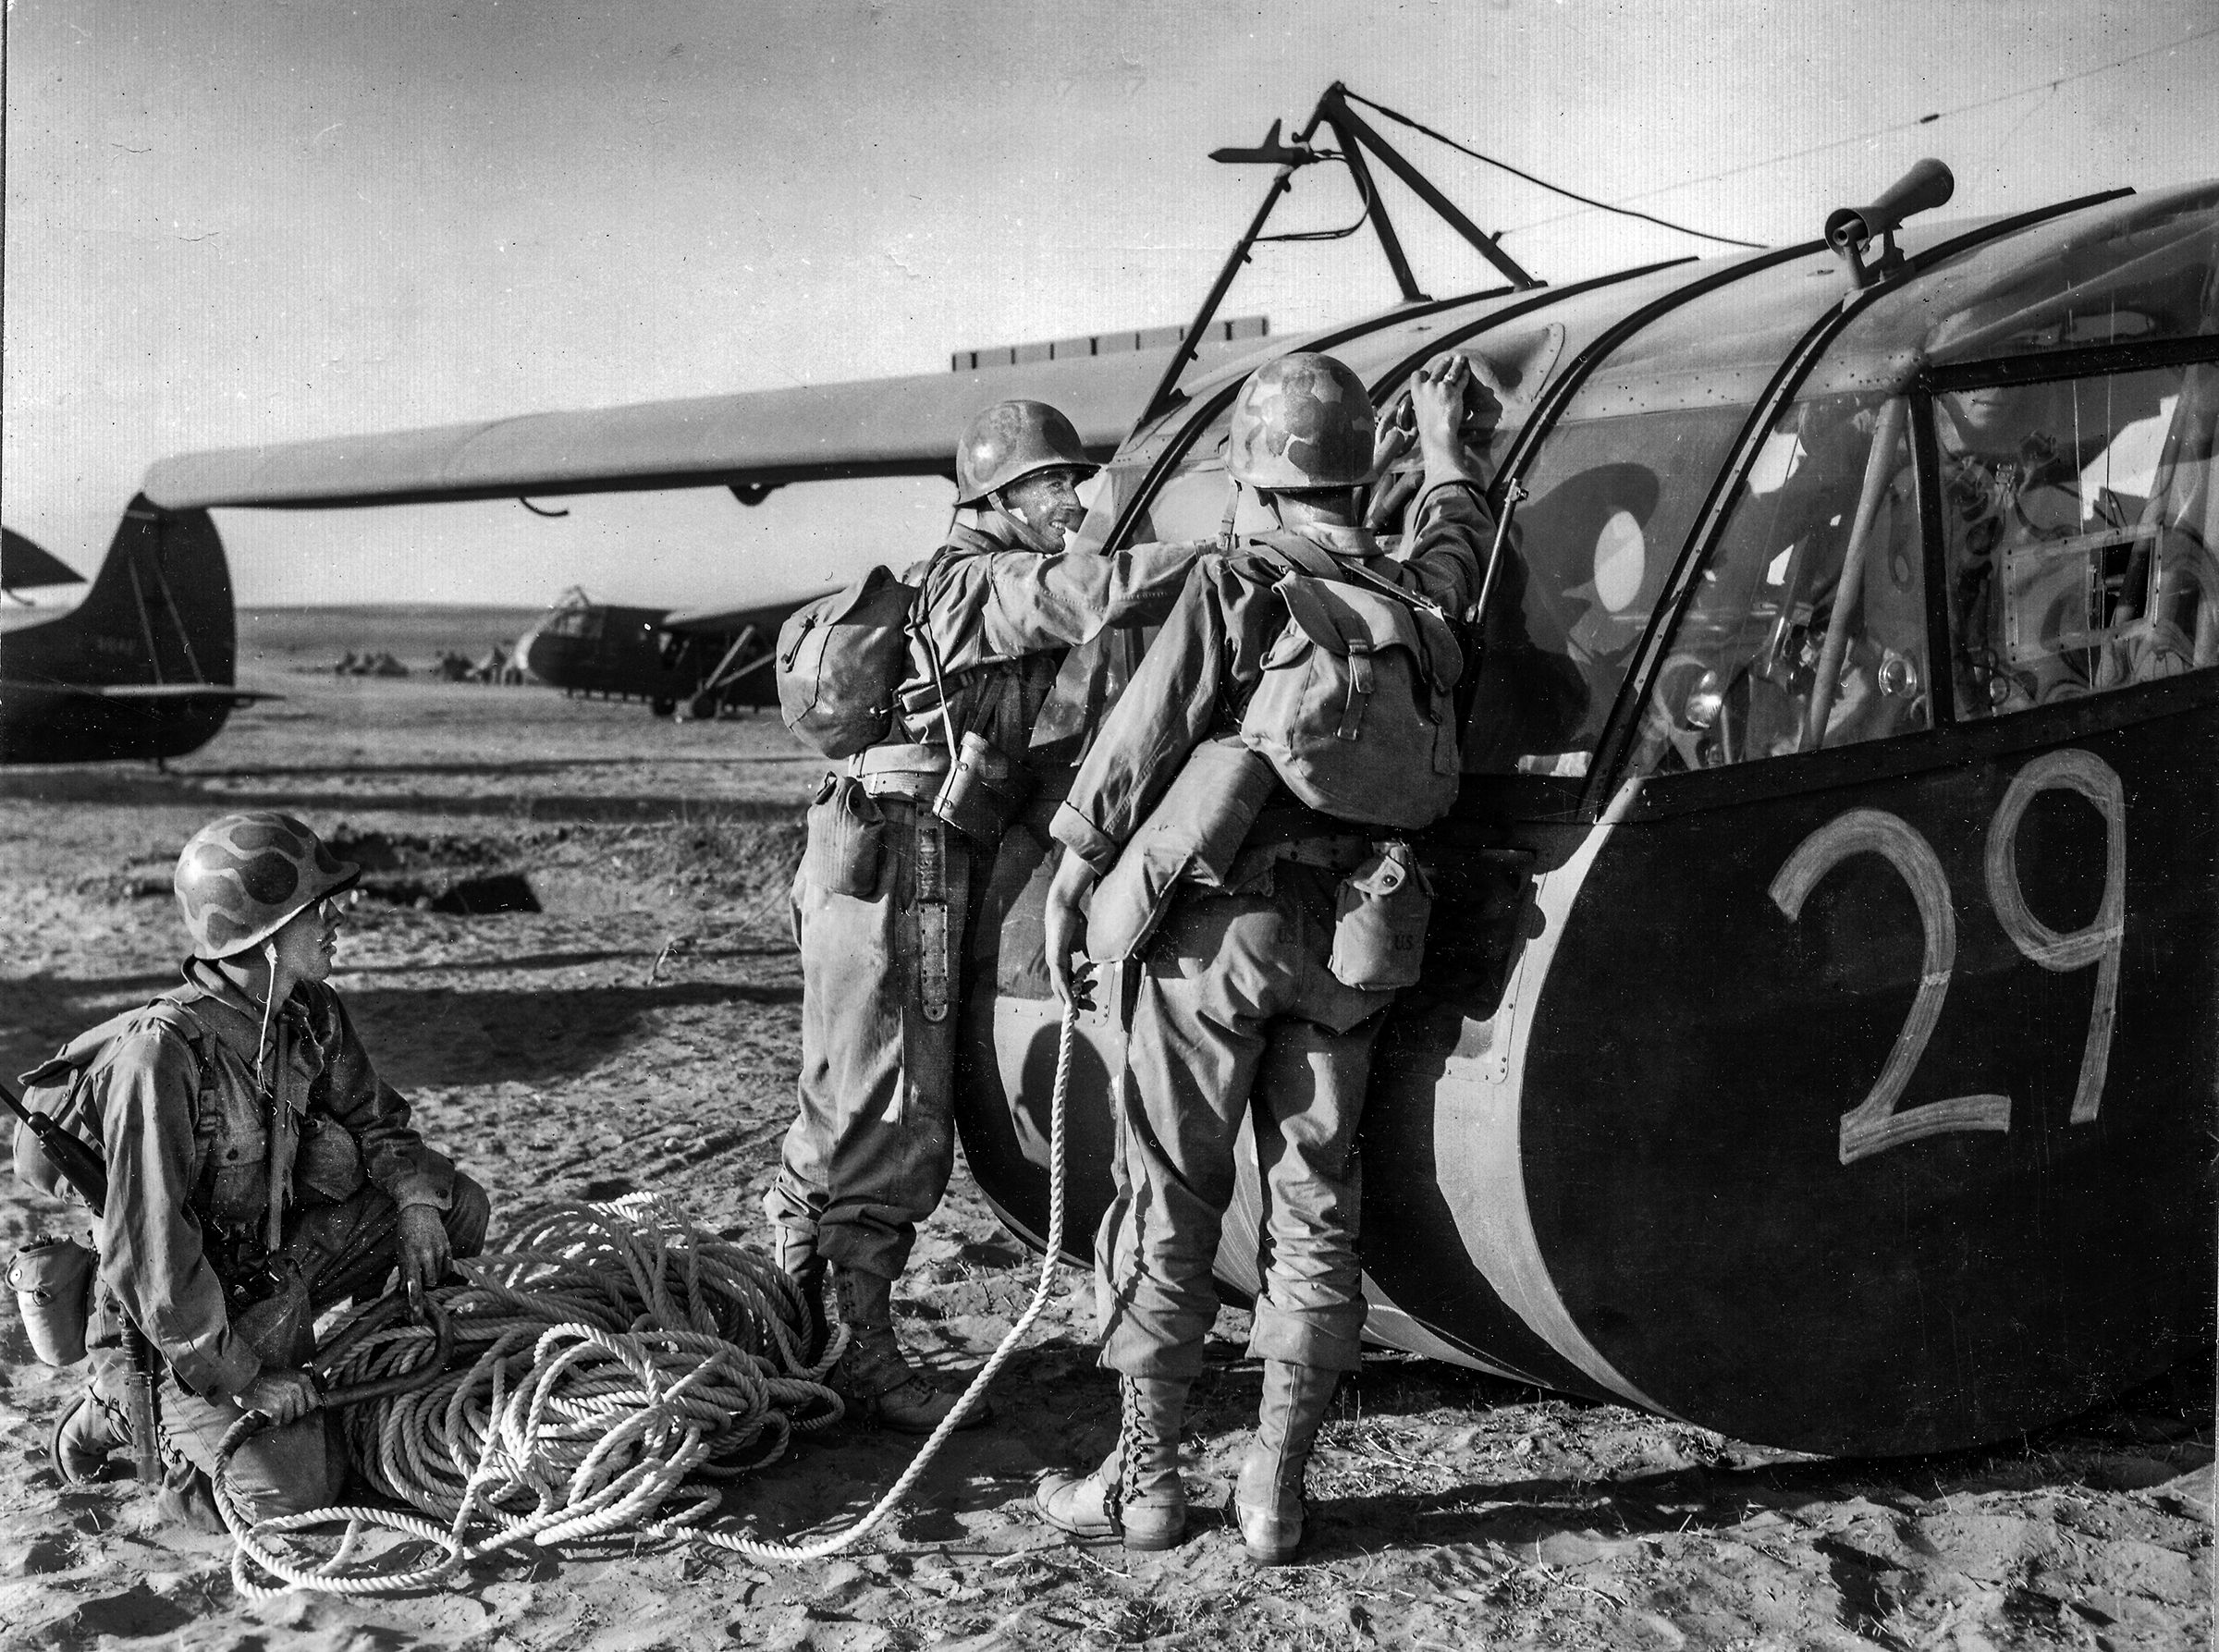 Glidermen attach the tow rope before the invasion of Sicily. Towed at about 120 mph for hours, the glider pilots’ tow rope—attached to the cockpit—was less than one inch in diameter.